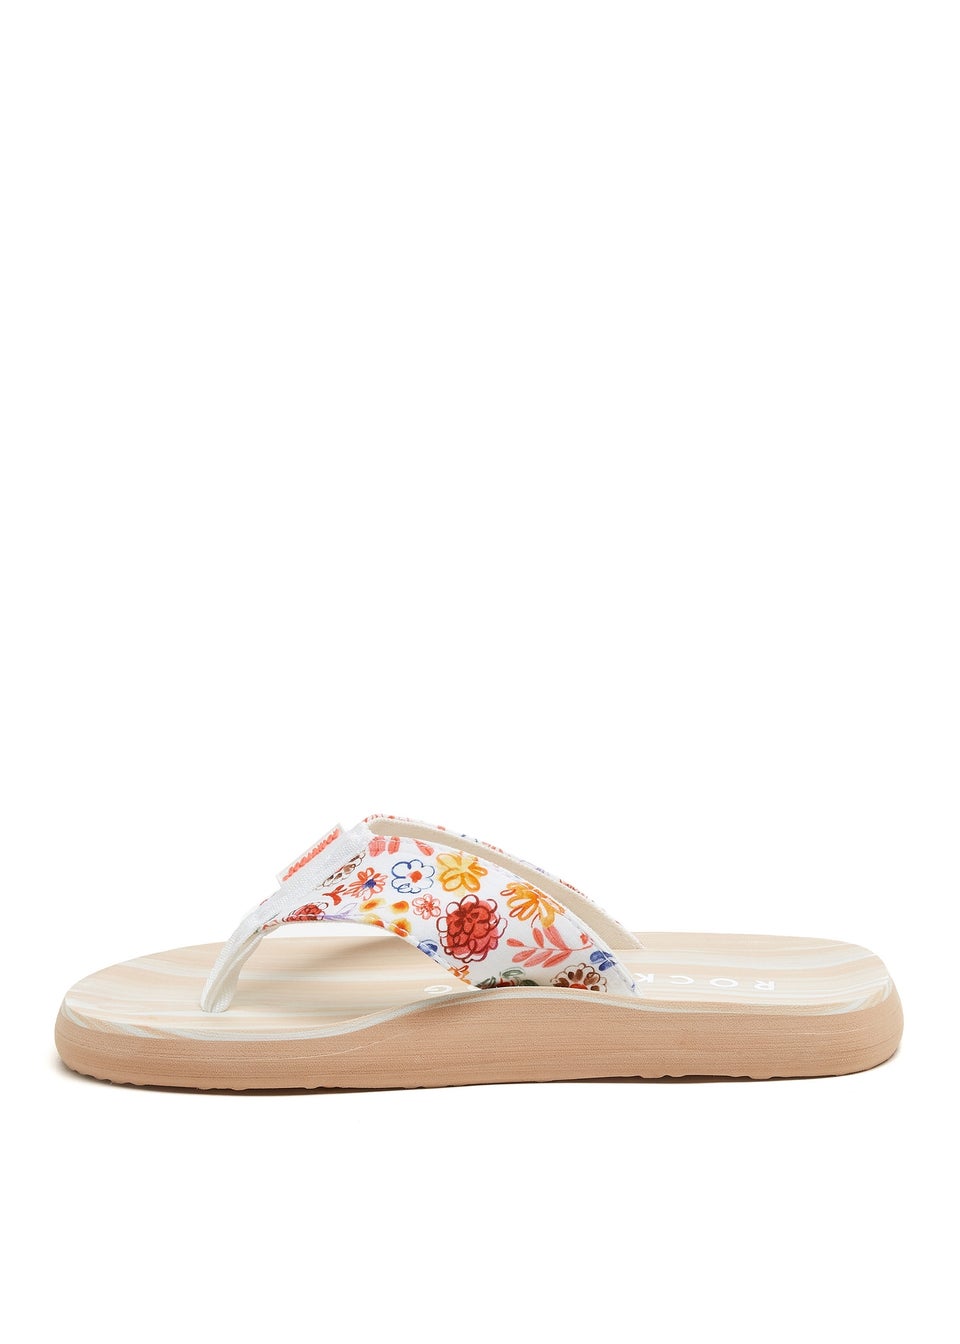 Multicolour Floral Adios Kitts Sandals